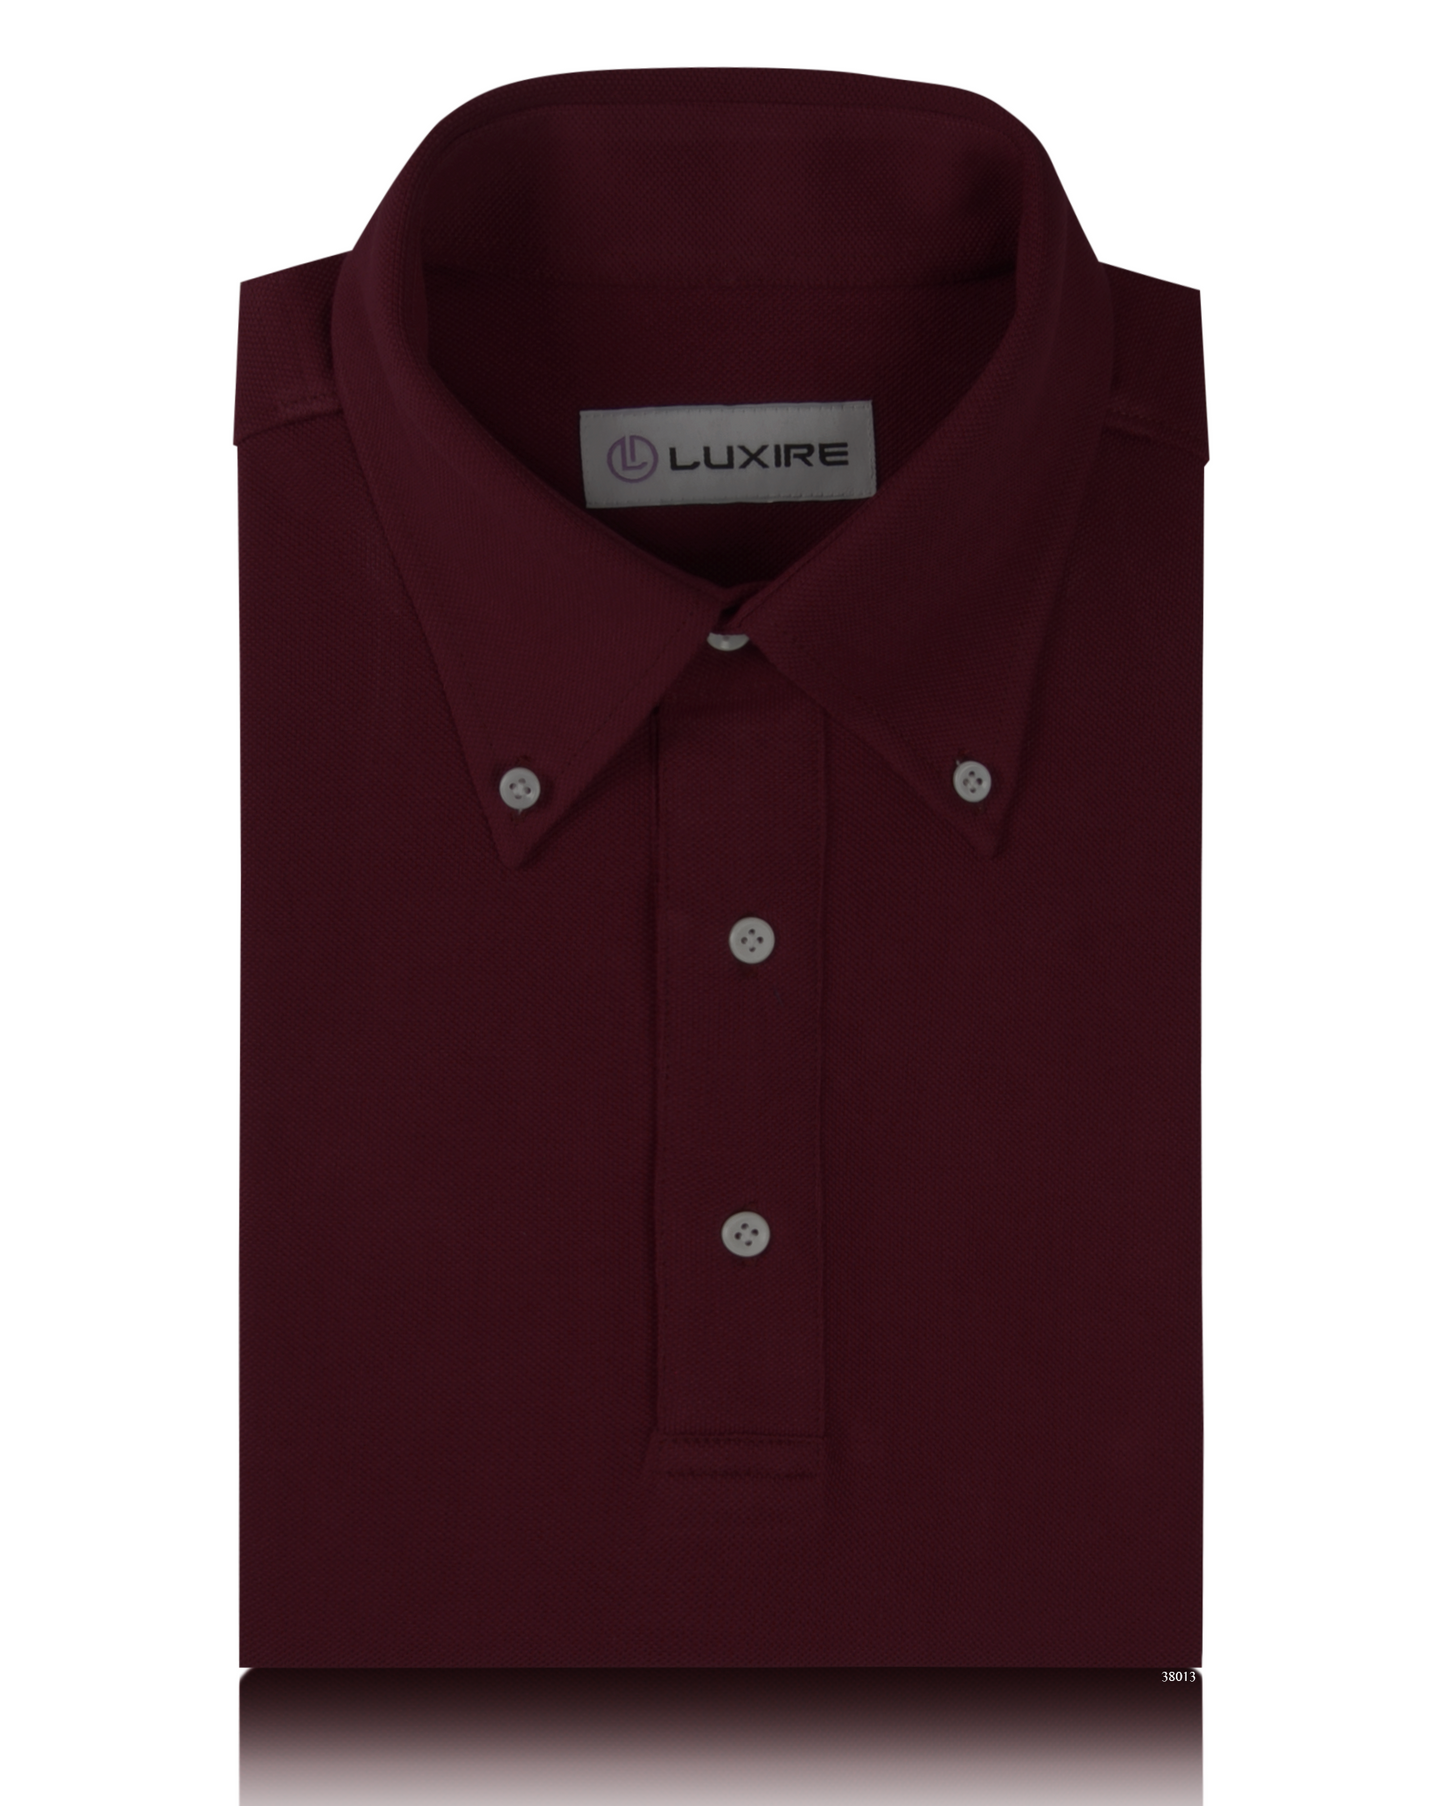 Front of the custom oxford polo shirt for men by Luxire in maroon